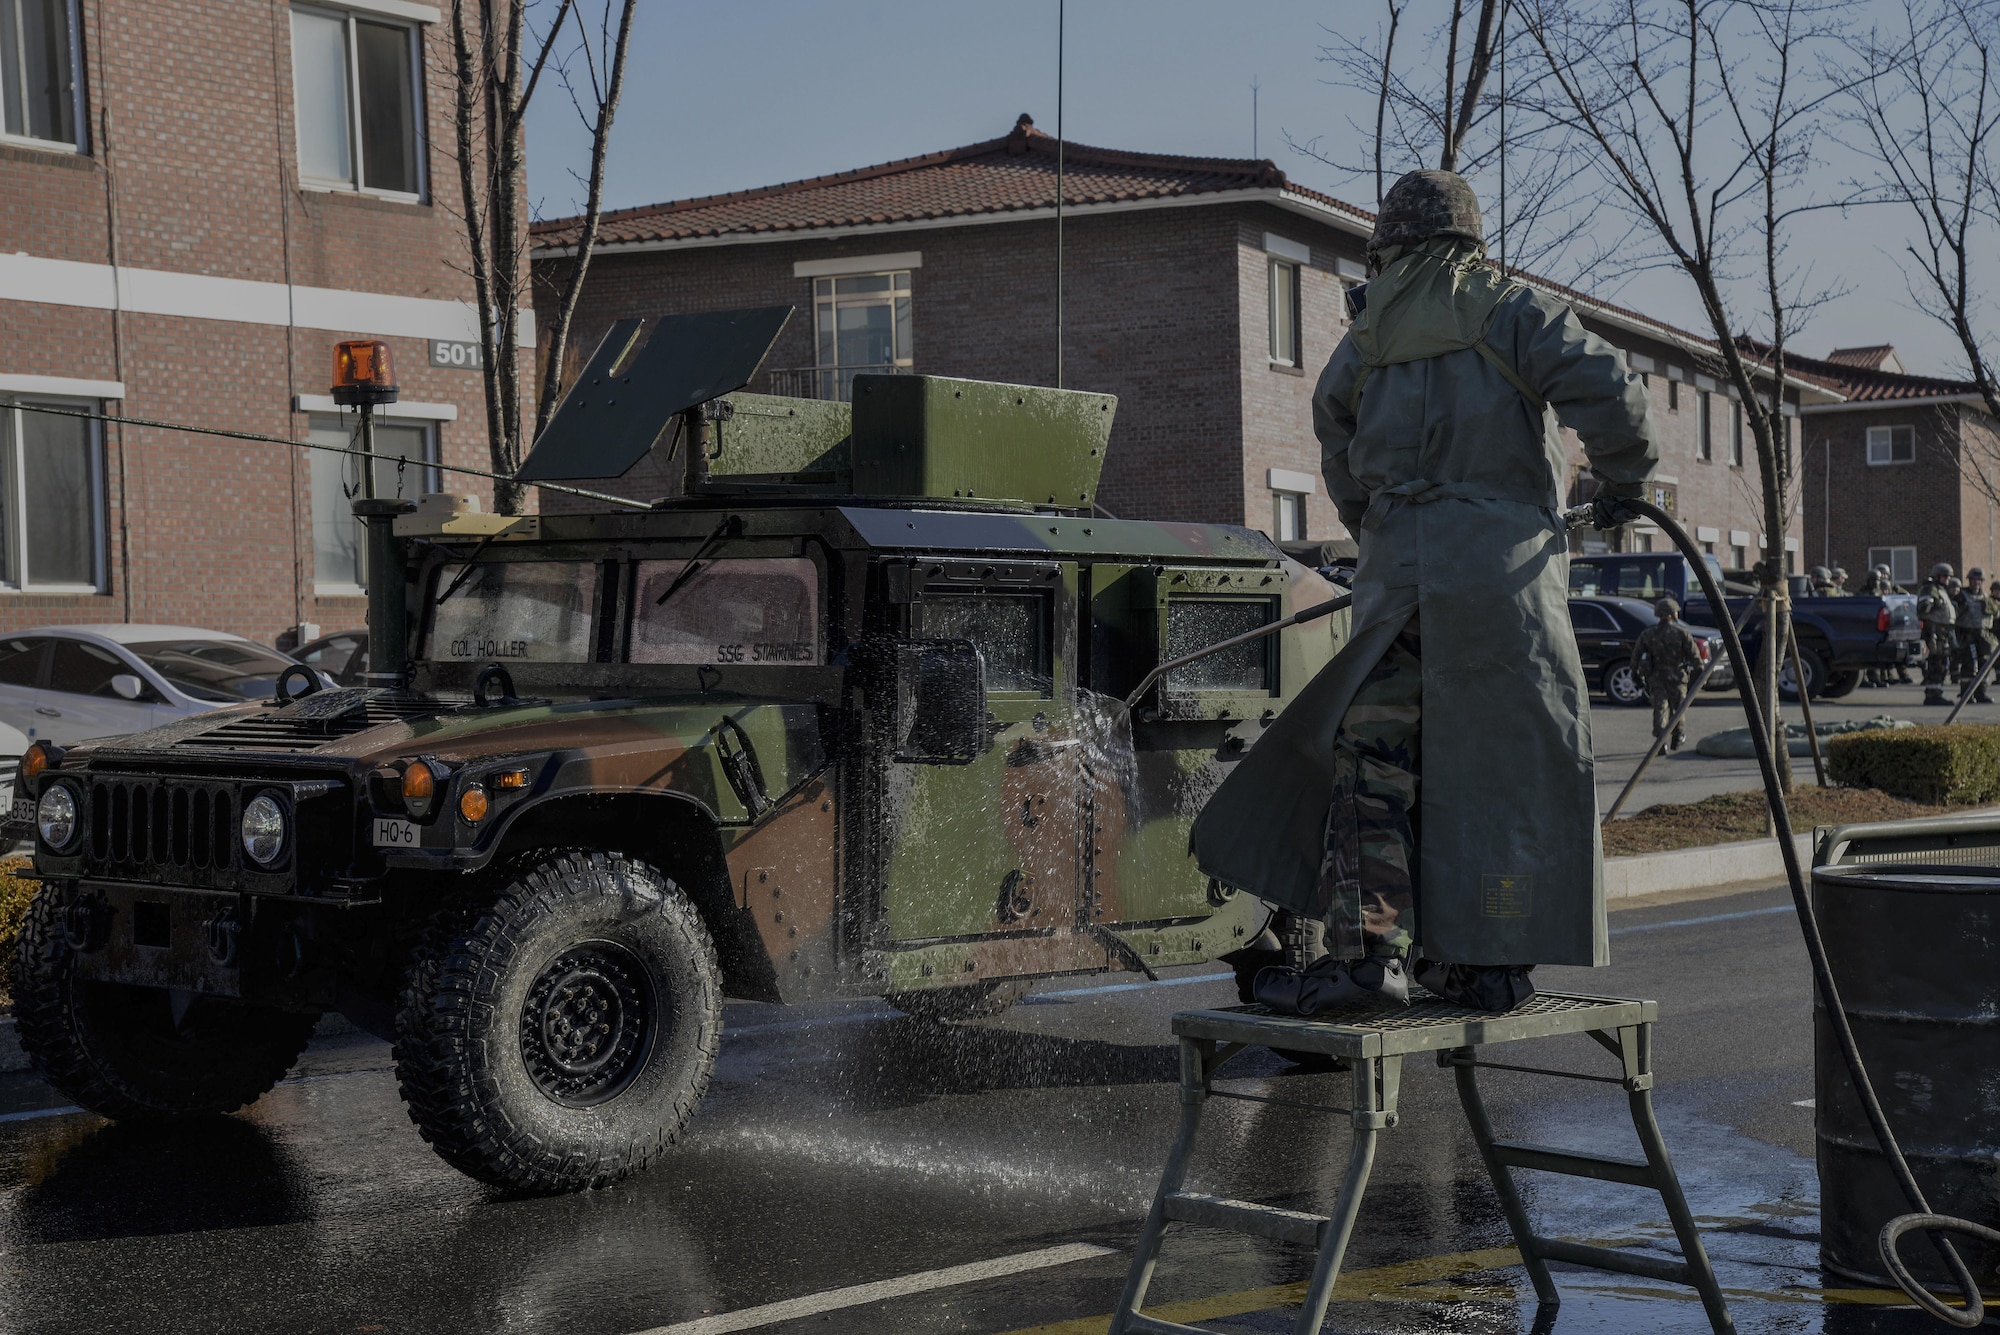 A Republic of Korea army soldier sprays down a U.S. Army Humvee to remove contaminates during a training scenario in Exercise Beverly Midnight 16-01 March 10, 2016, on Osan Air Base, ROK. The scenario ended after the ROK members, who sprayed down the vehicles, then processed through a contamination control point. BM 16-01 is an exercise designed to test the warfighting capabilities of the units assigned to the 51st Fighter Wing with a focus on readiness, defending the base and executing flying operations. (U.S. Air Force photo by Tech. Sgt. Travis Edwards/Released) 